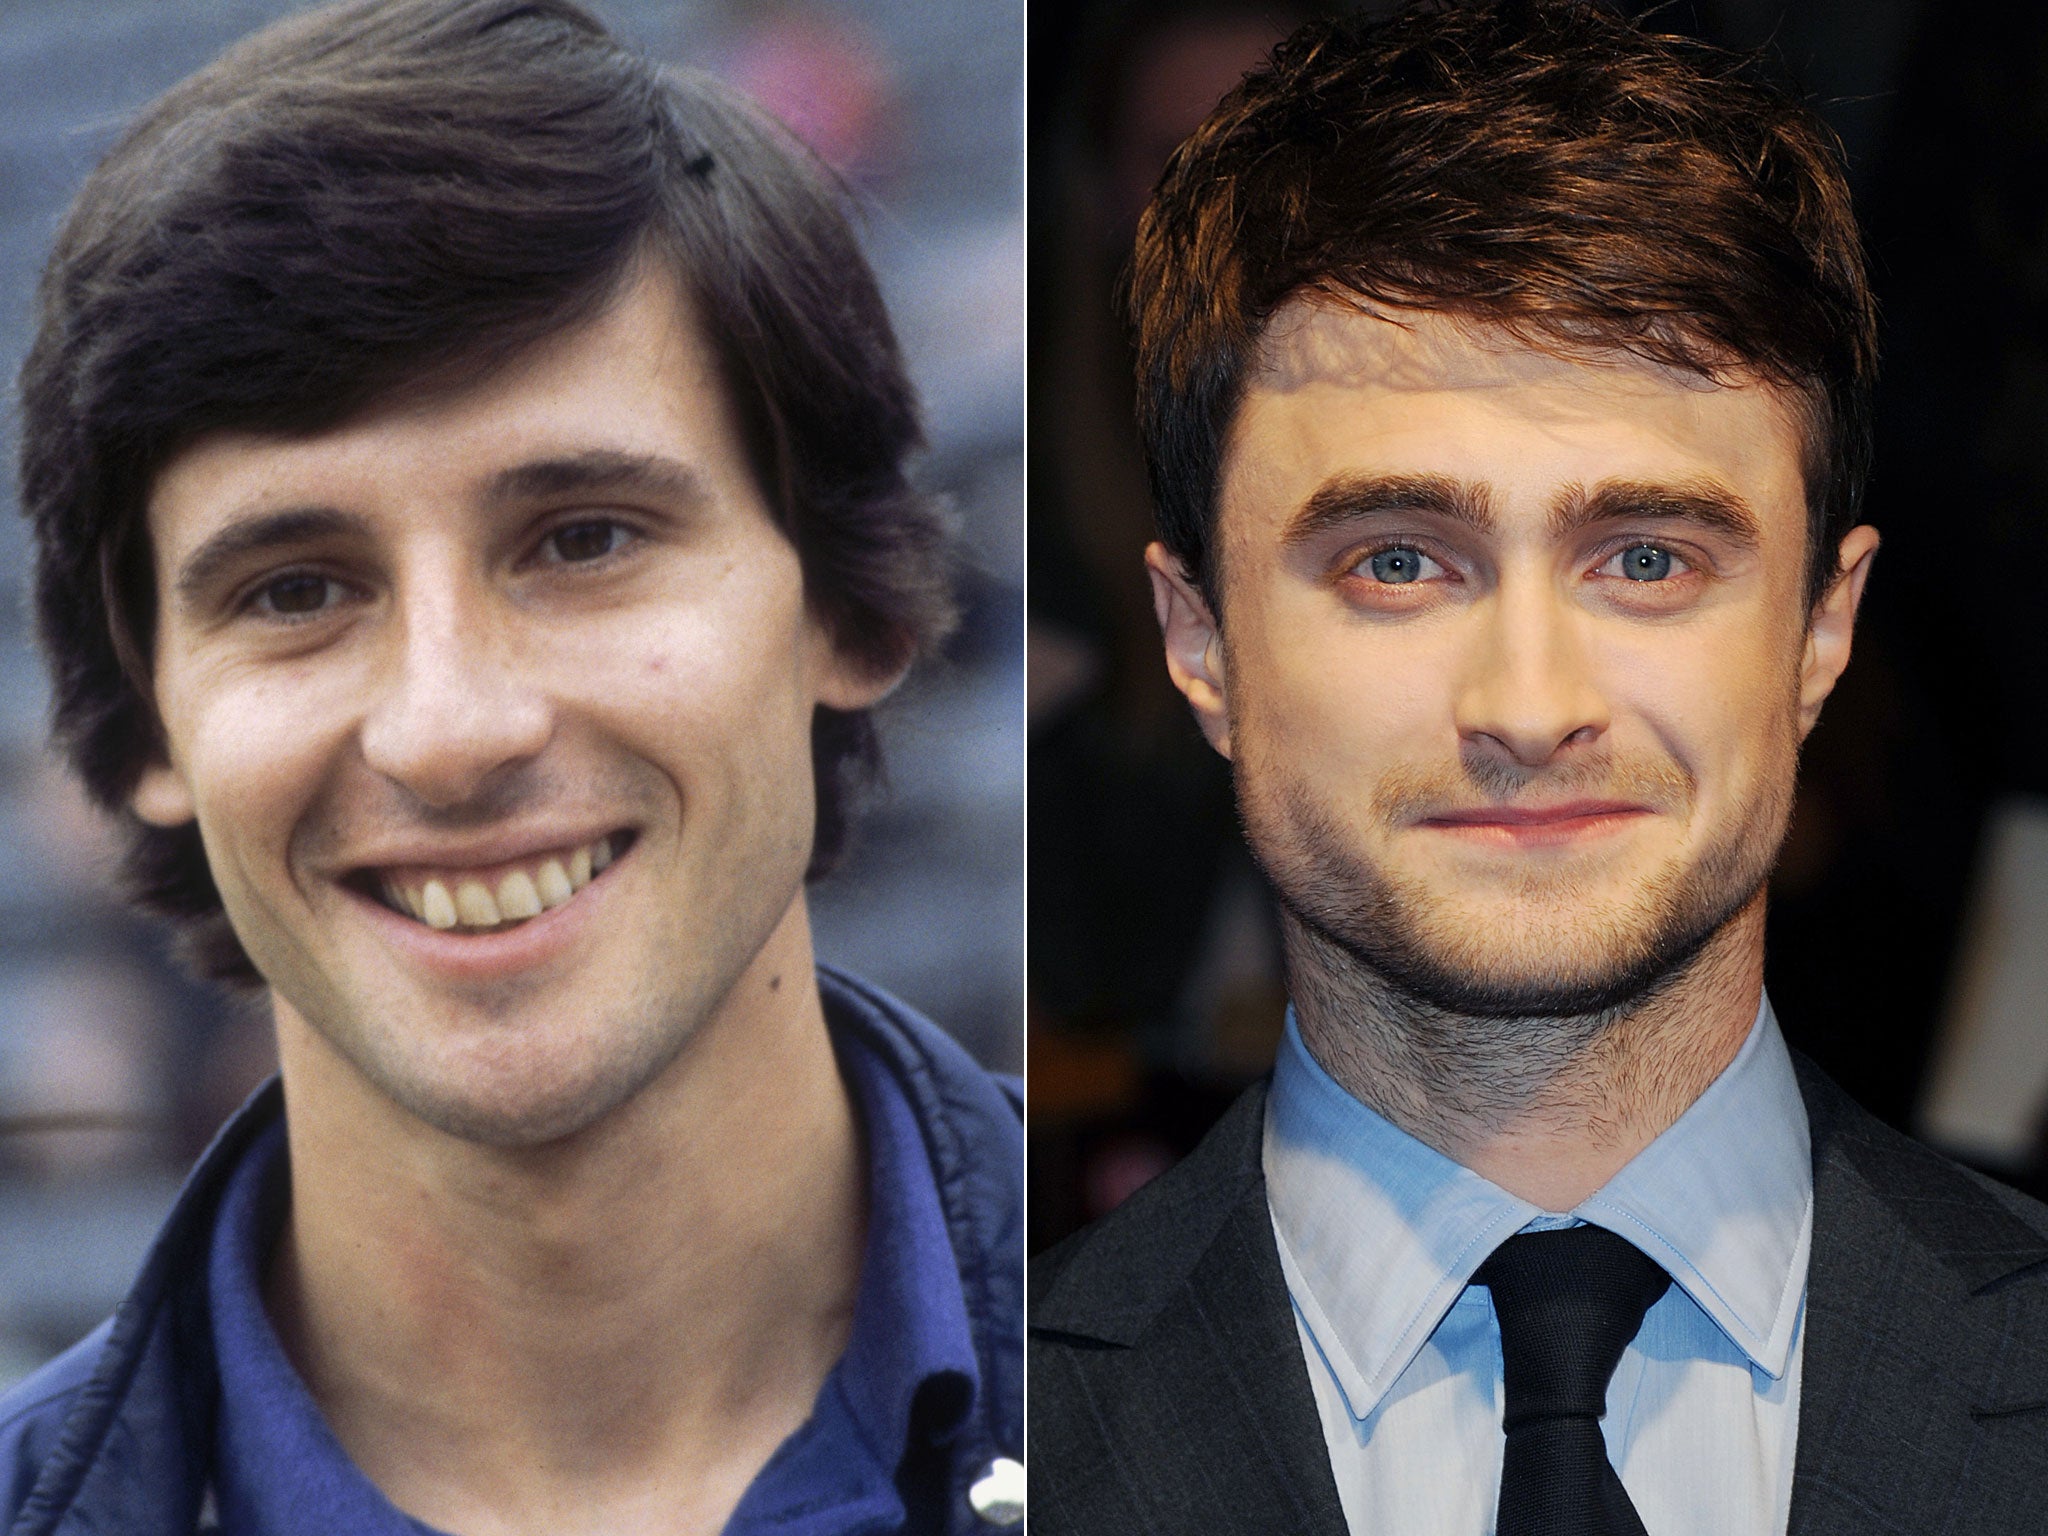 Daniel Radcliffe is set to play Sebastian Coe in a new film